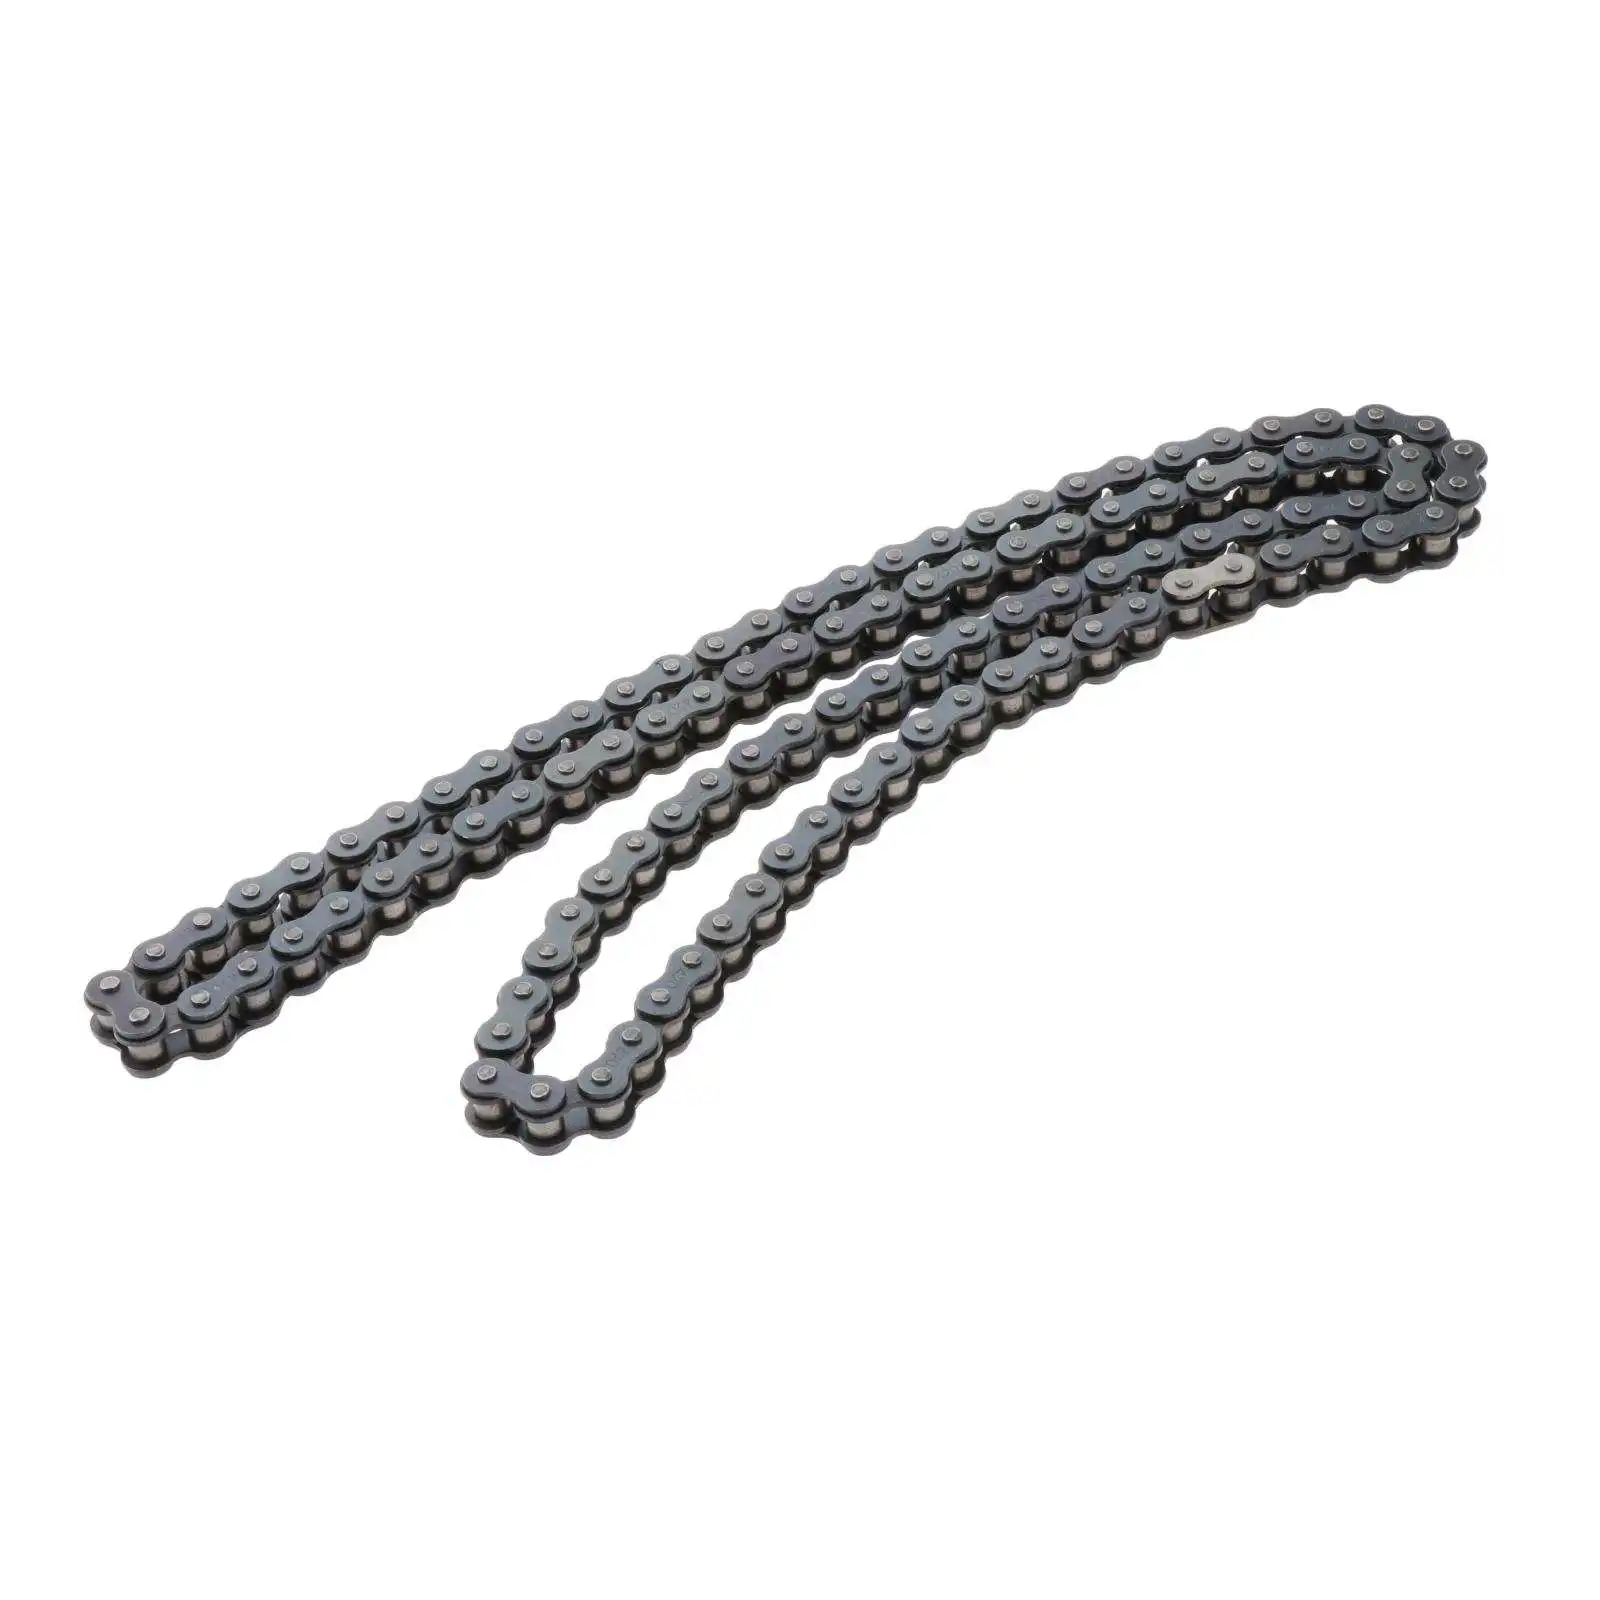 420 Motorcycle Chain 50-110Cc Tools Drive Chain 96 Link 102 Link 104 Link 106 Link Motorcycle Chain for Motorcycle Bike